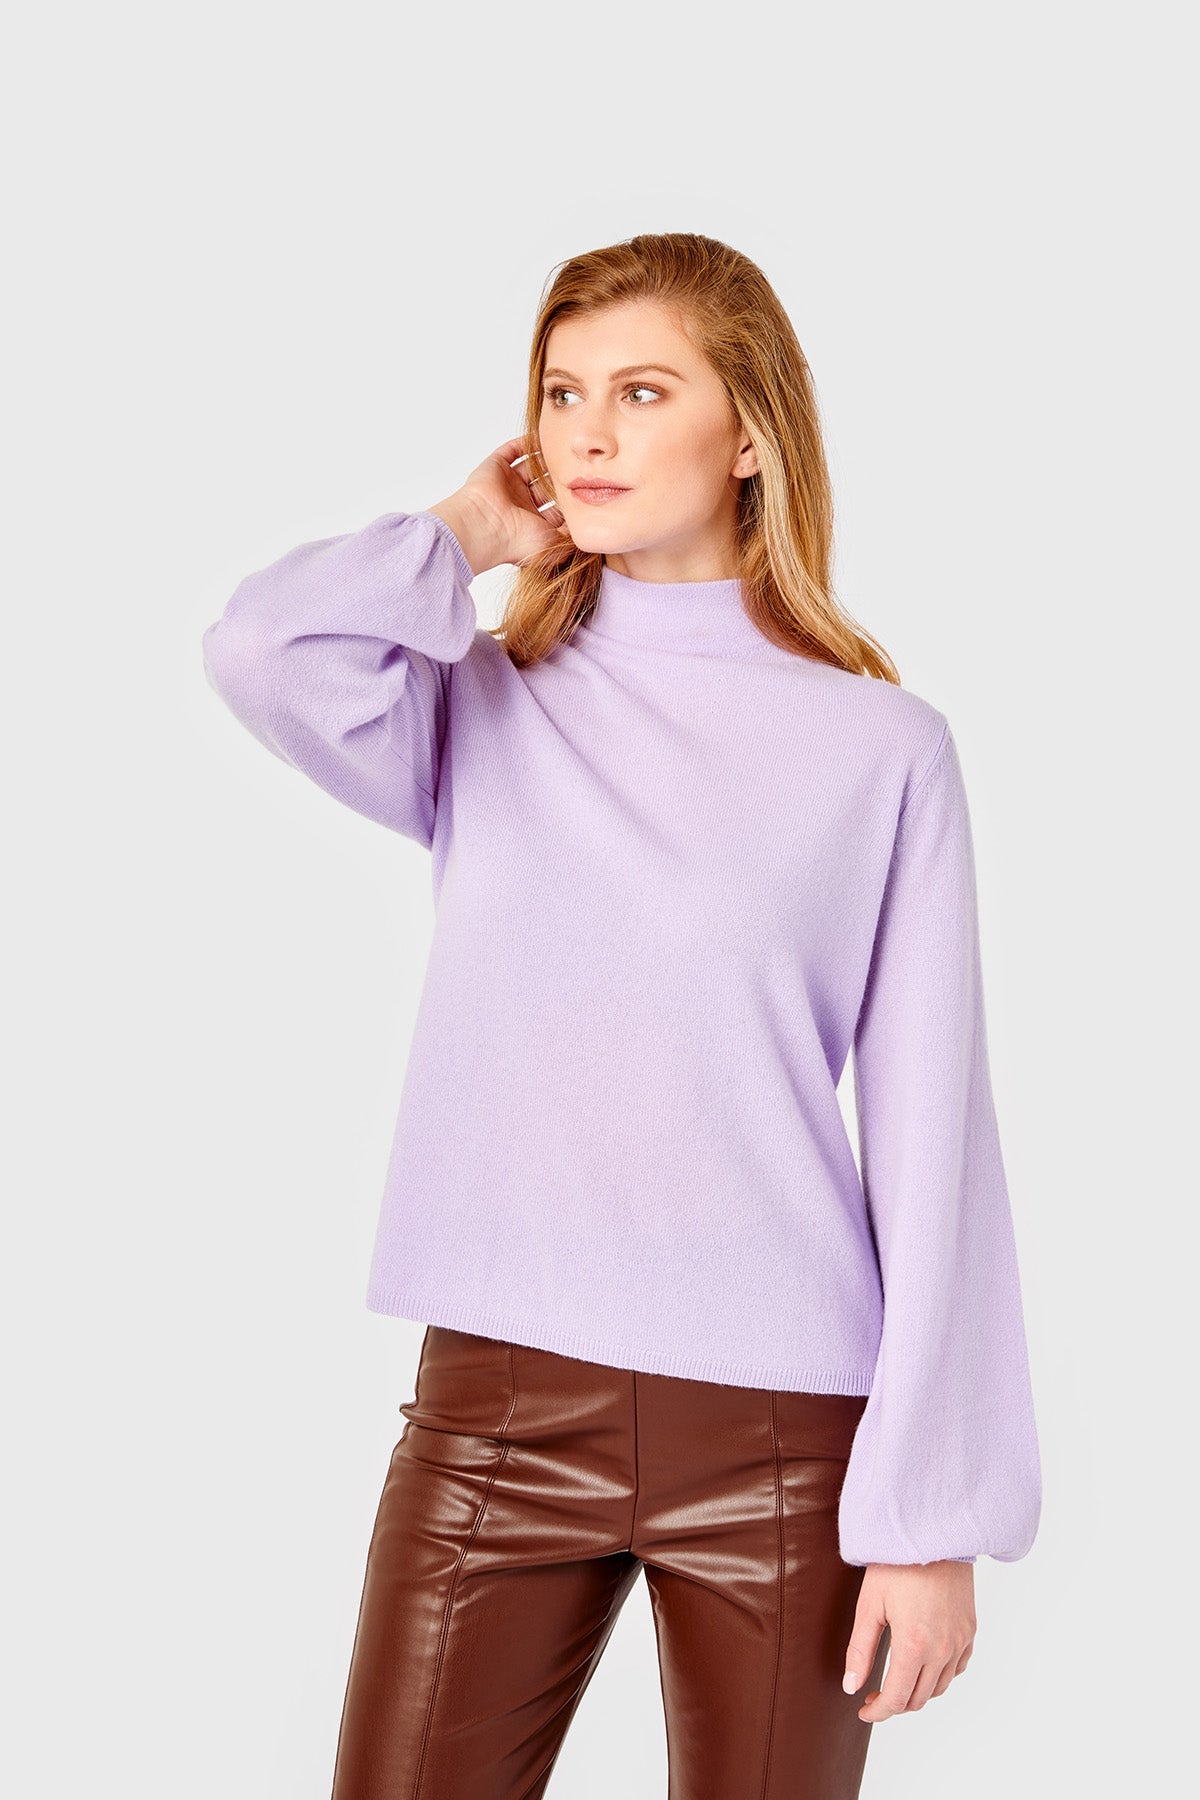 Willow Sweater-Cashmere-Lavender by Cartolina